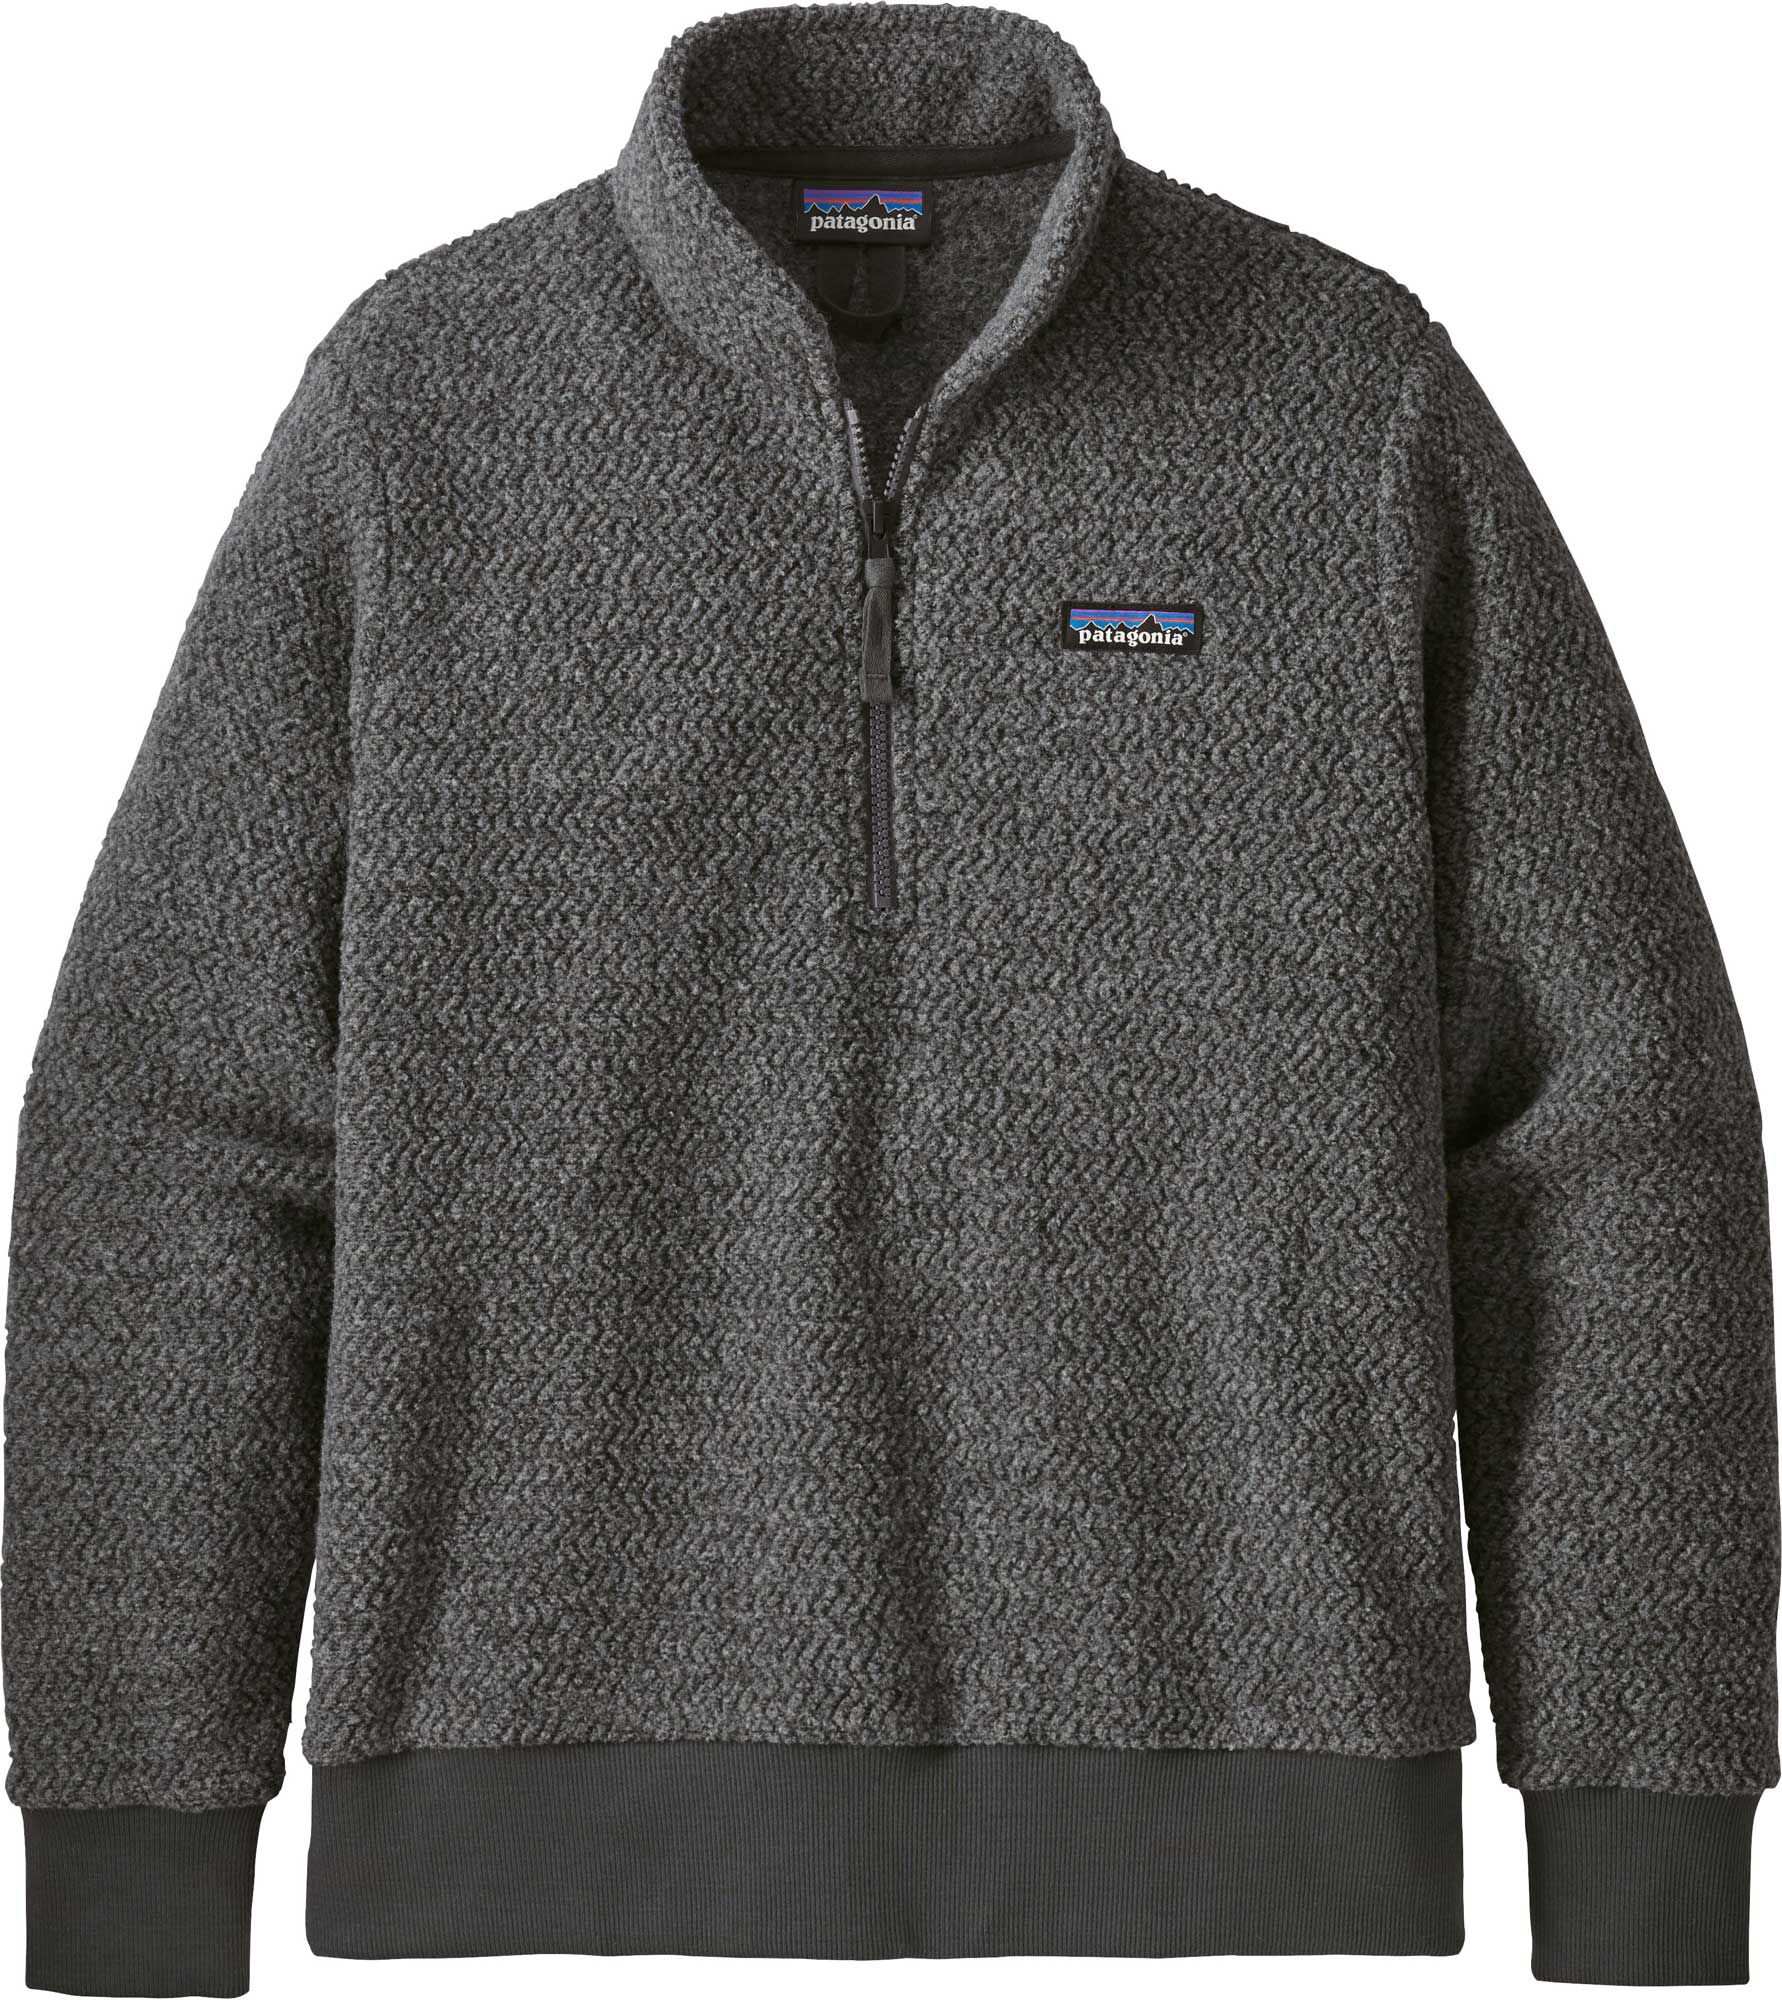 sherpa pullover women's patagonia